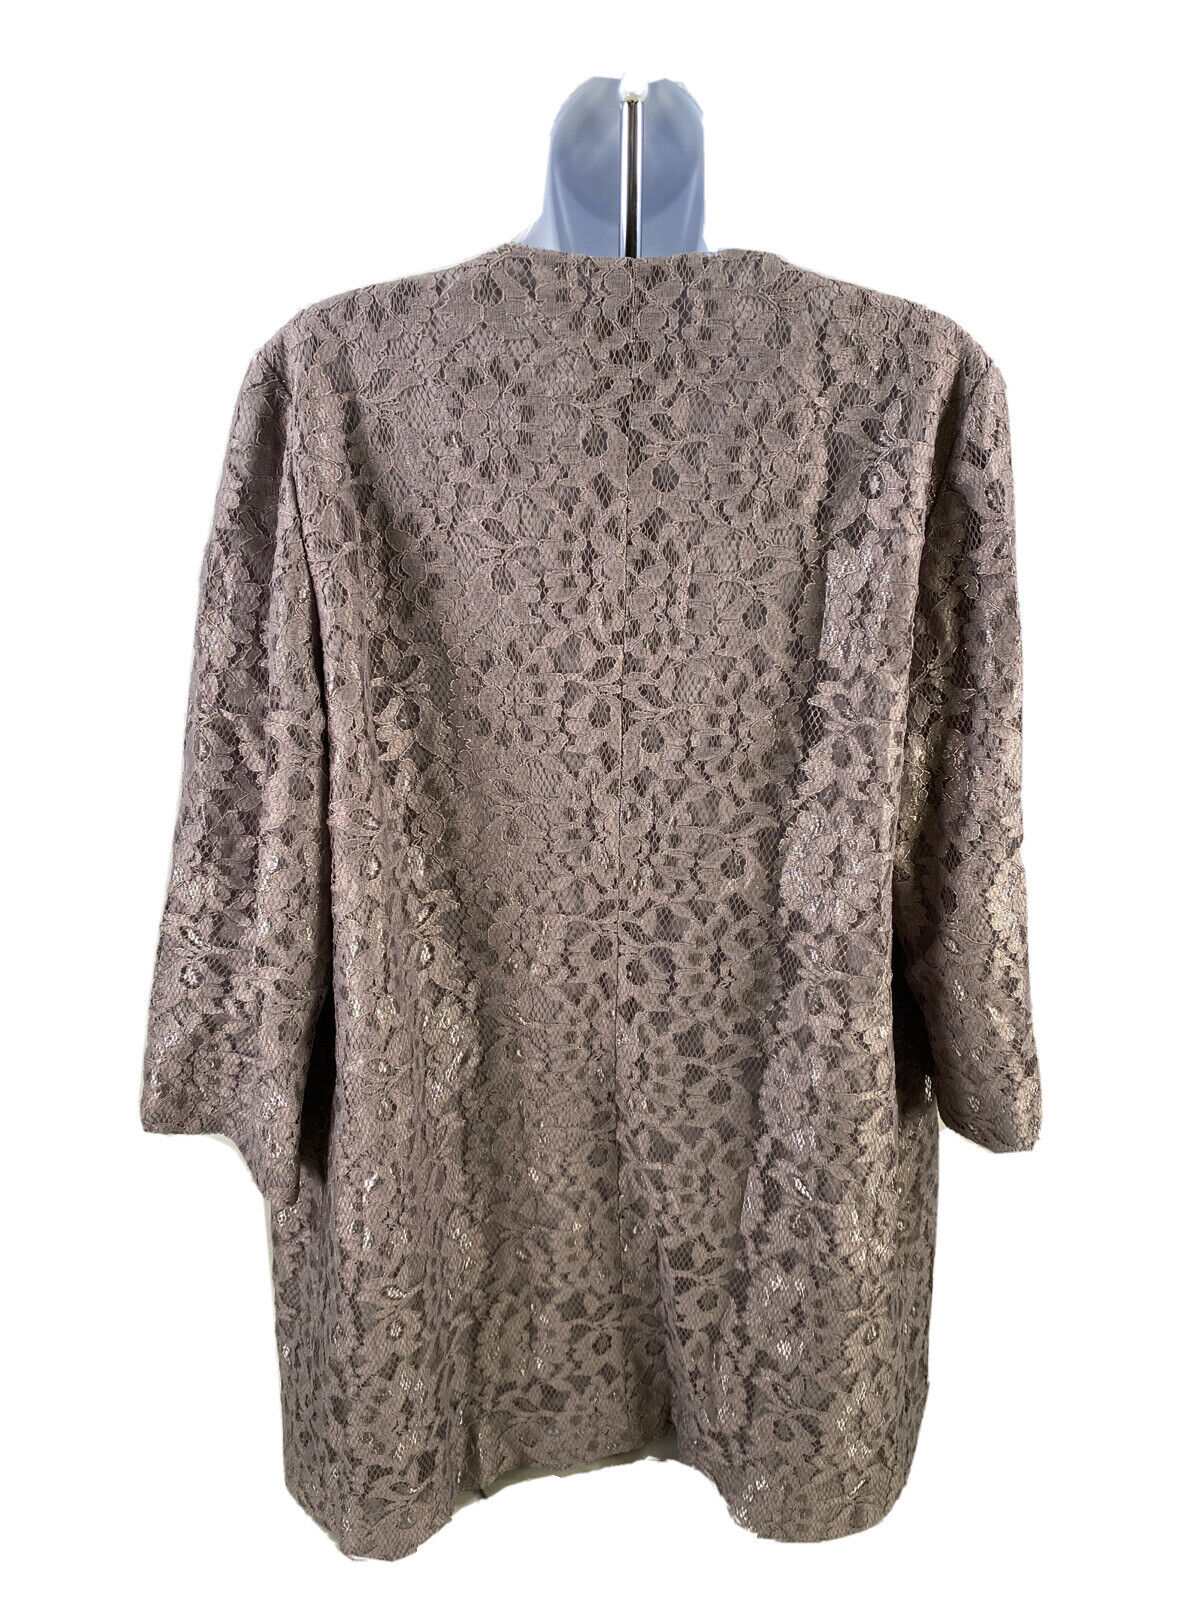 NEW Chico's Women' Gray Lace Topper 3/4 Sleeve Open Jacket - 1 (US M)